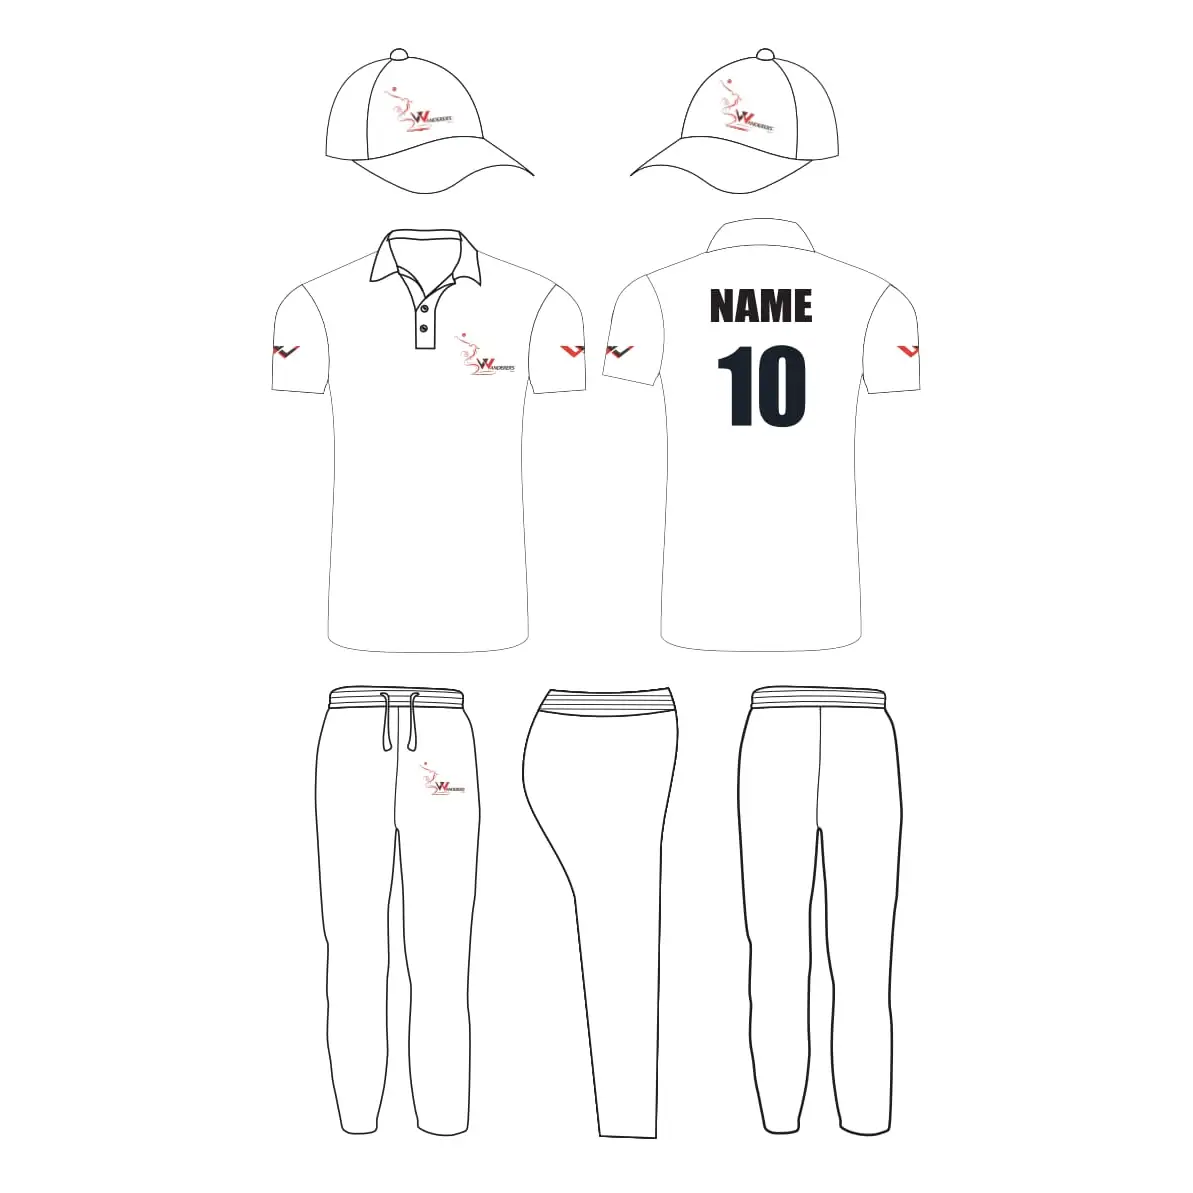 Customized White Test Cricket Uniform With Name And Number - Custom Cricket Wear 3PC Full